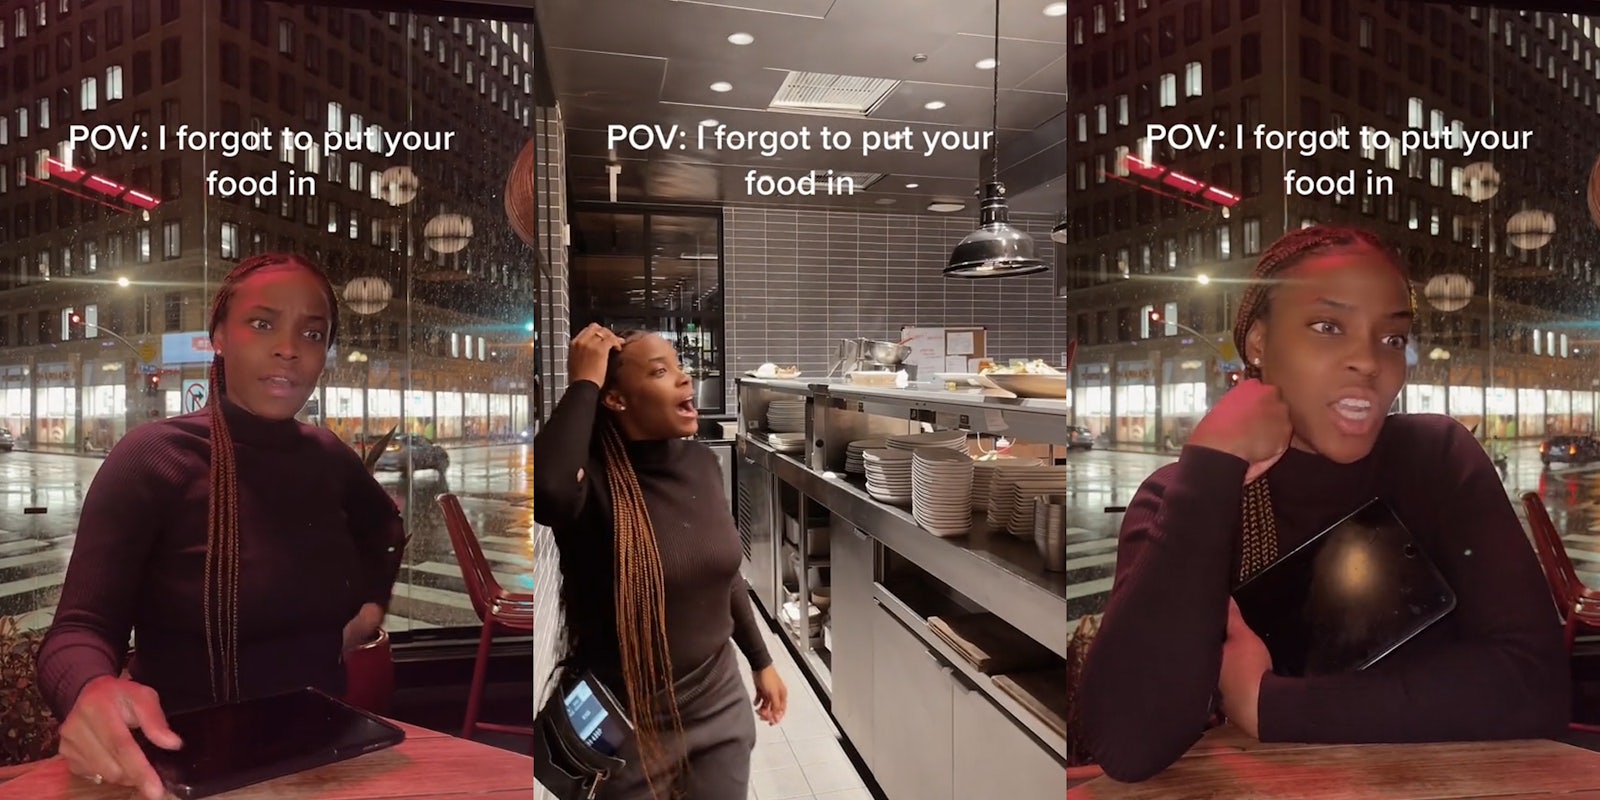 server speaking with caption 'POV: I forgot to put your food in' (l) server speaking in kitchen with caption 'POV: I forgot to put your food in' (c) server speaking with caption 'POV: I forgot to put your food in' (r)